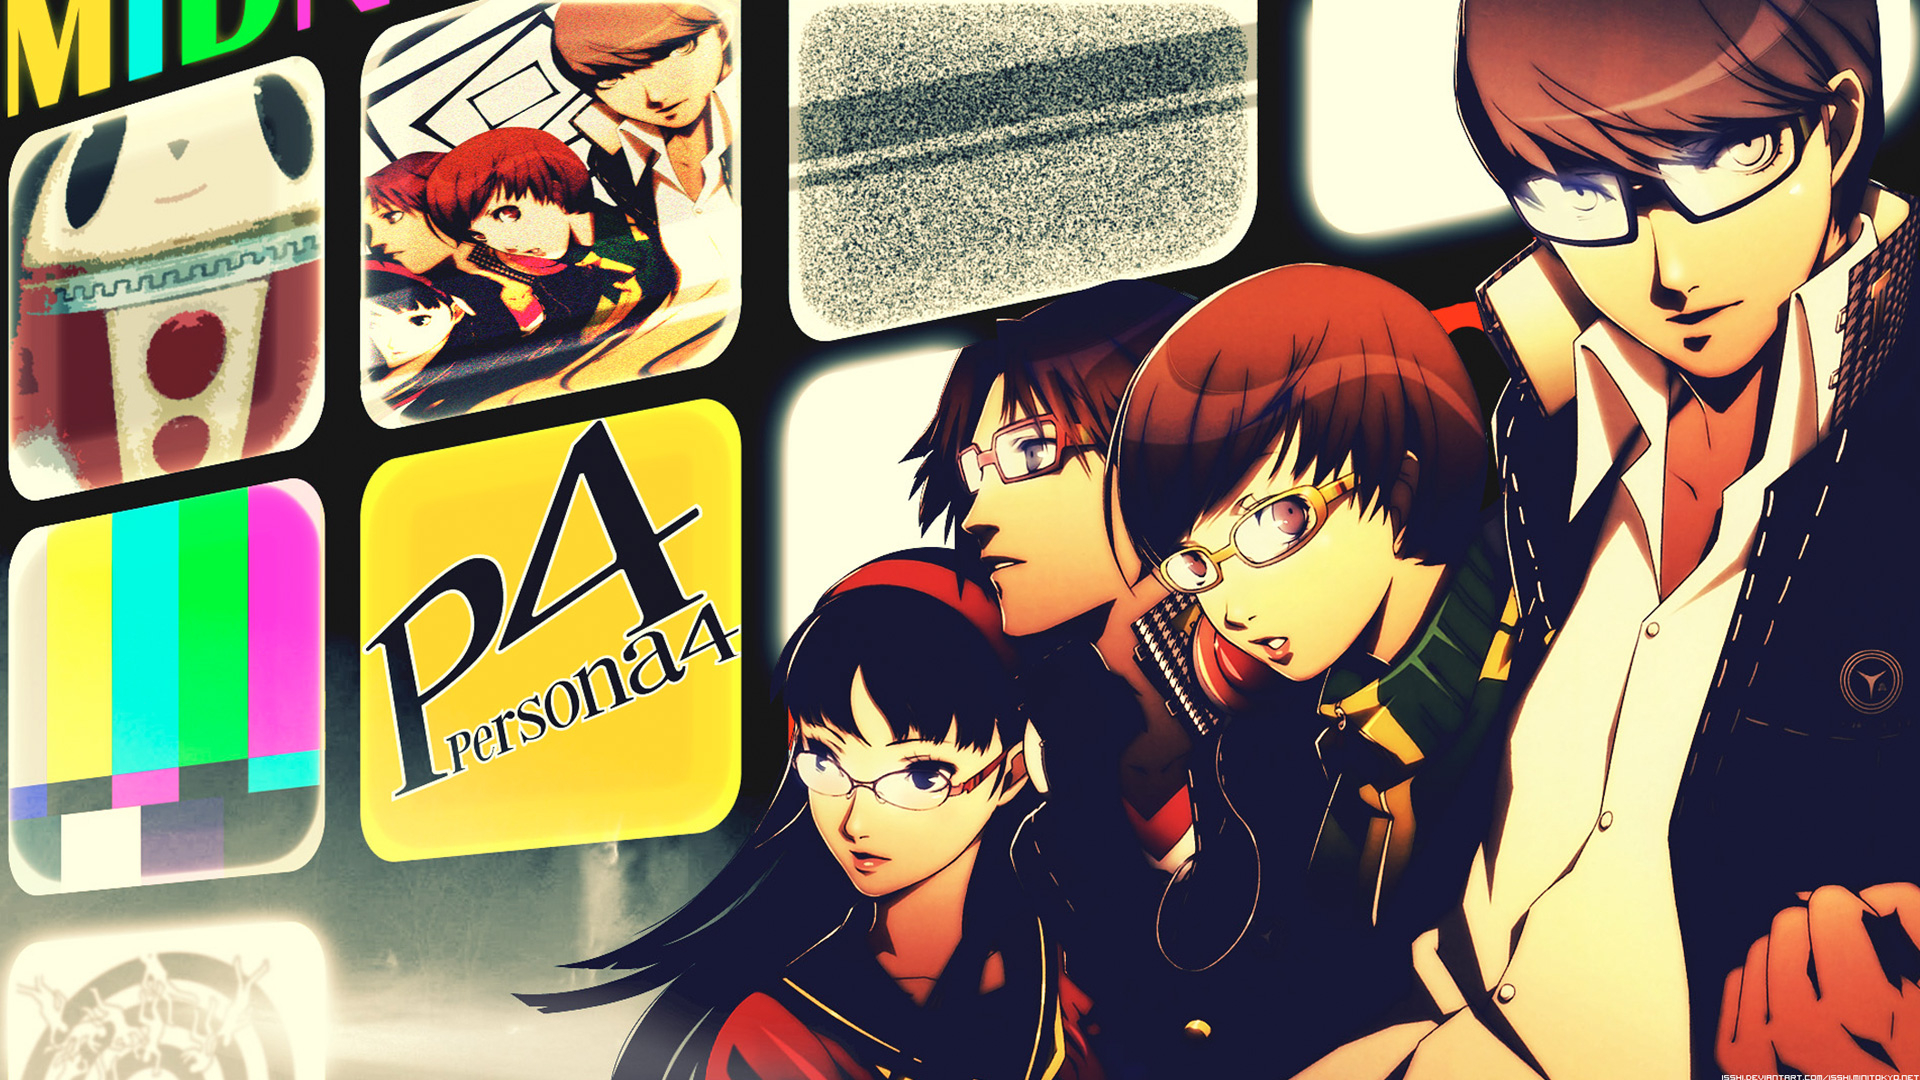 1920x1080 Cool Persona 4 Wallpapers Top Free Cool Persona 4 Backgrounds